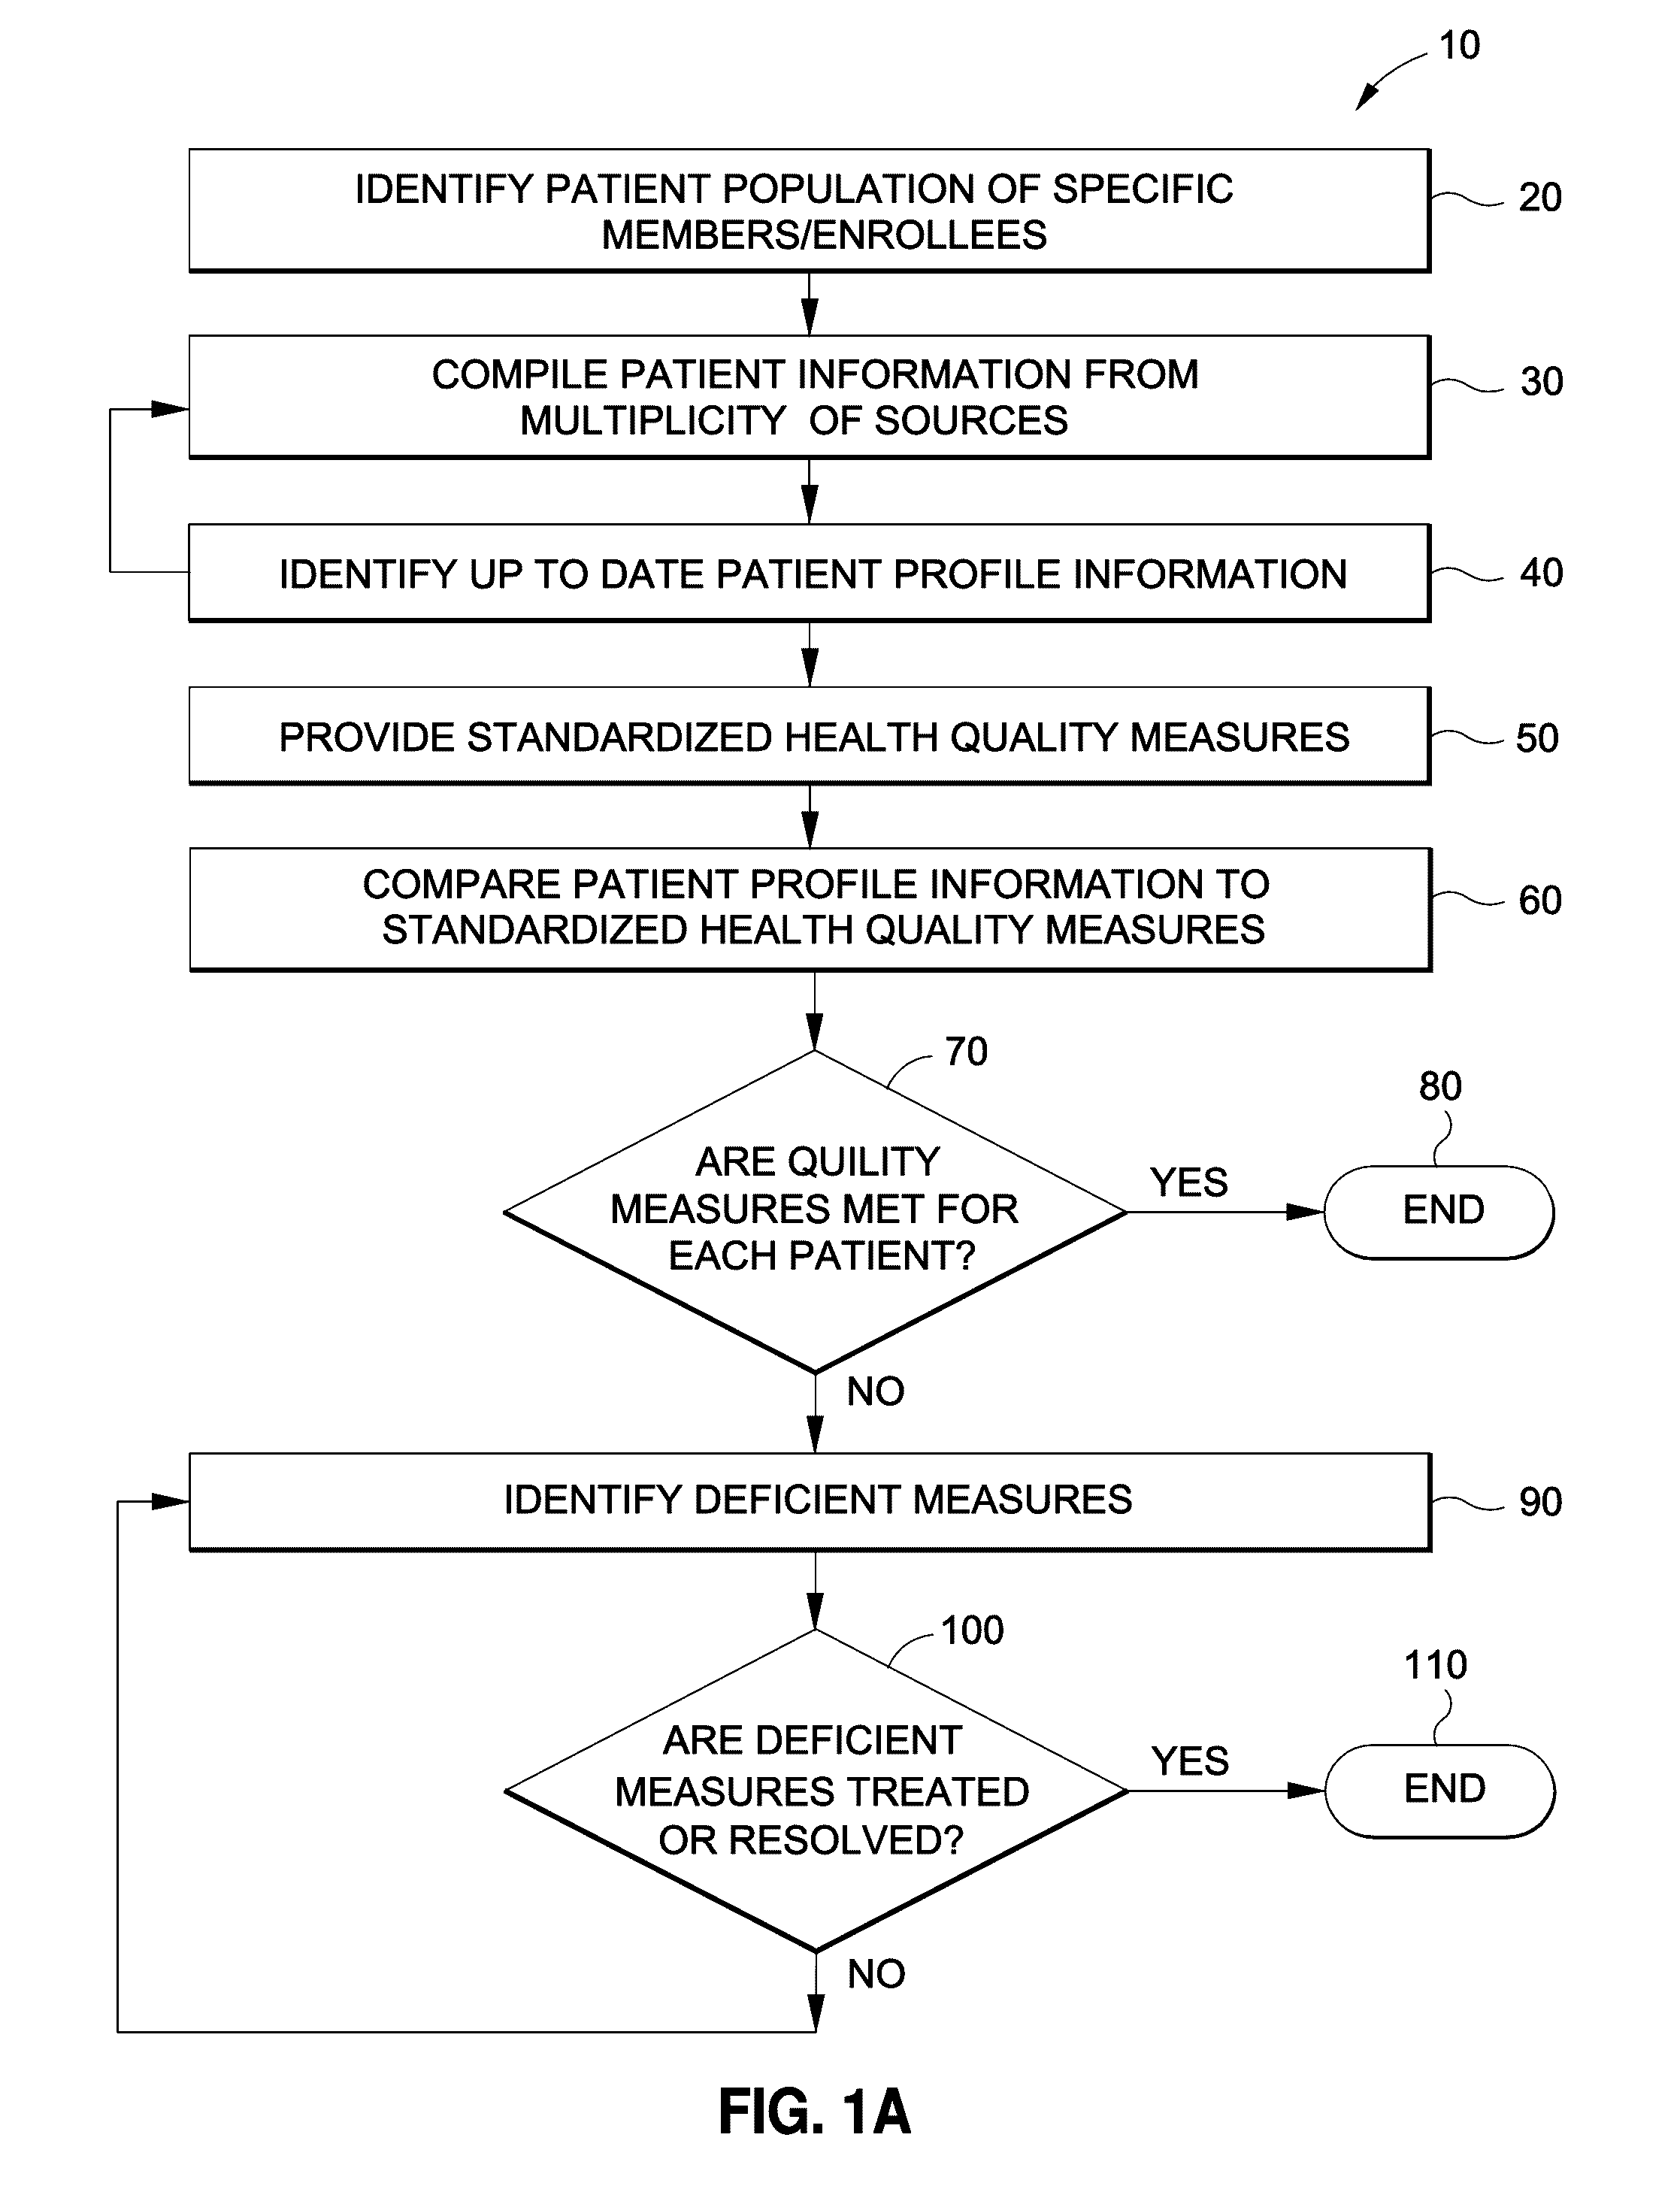 Multicomputer data transferring and processing system